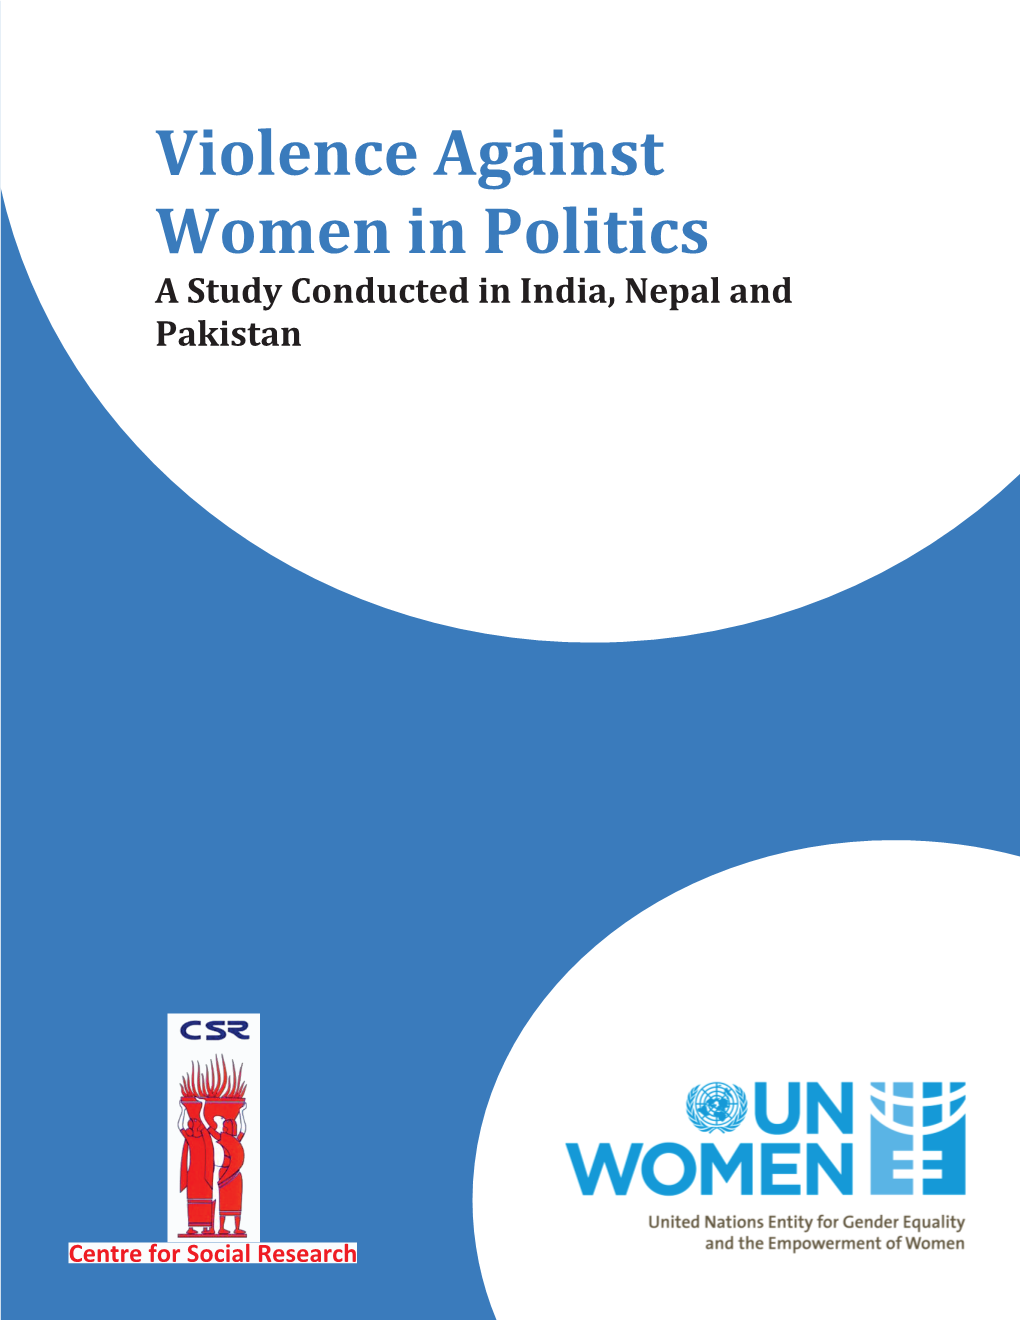 Violence Against Women in Politics (A Study Conducted in India, Nepal and Pakistan)